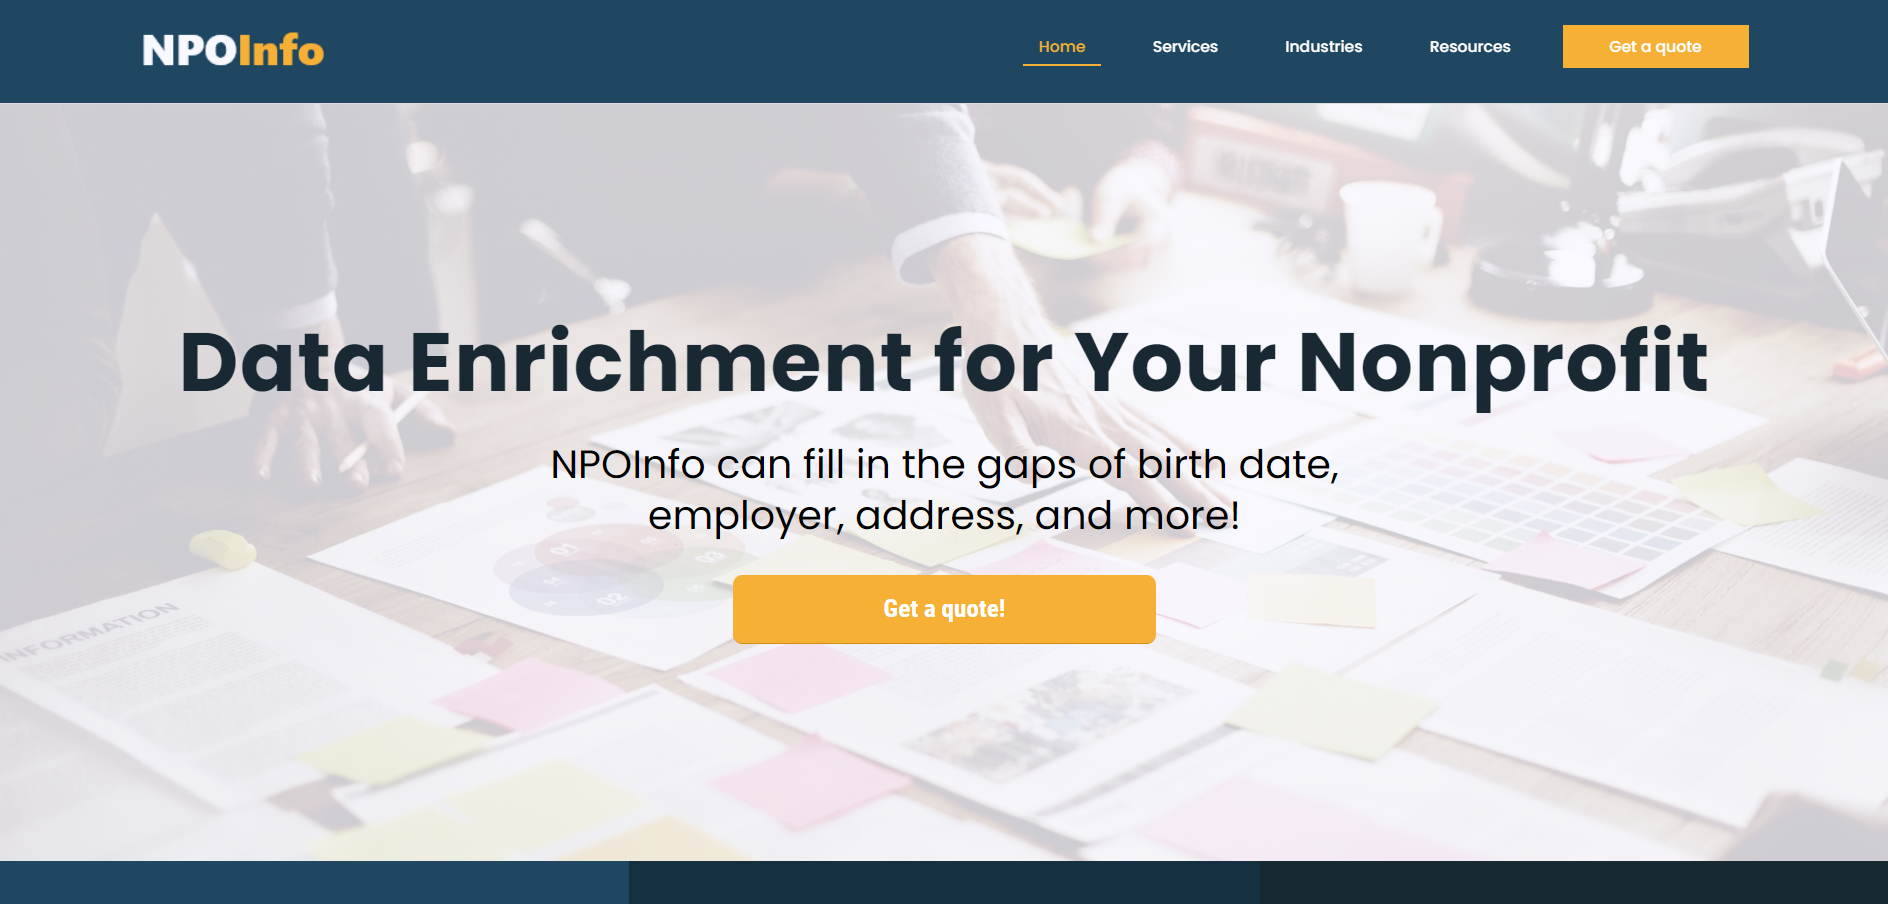 NPOInfo is our recommended wealth screening tool